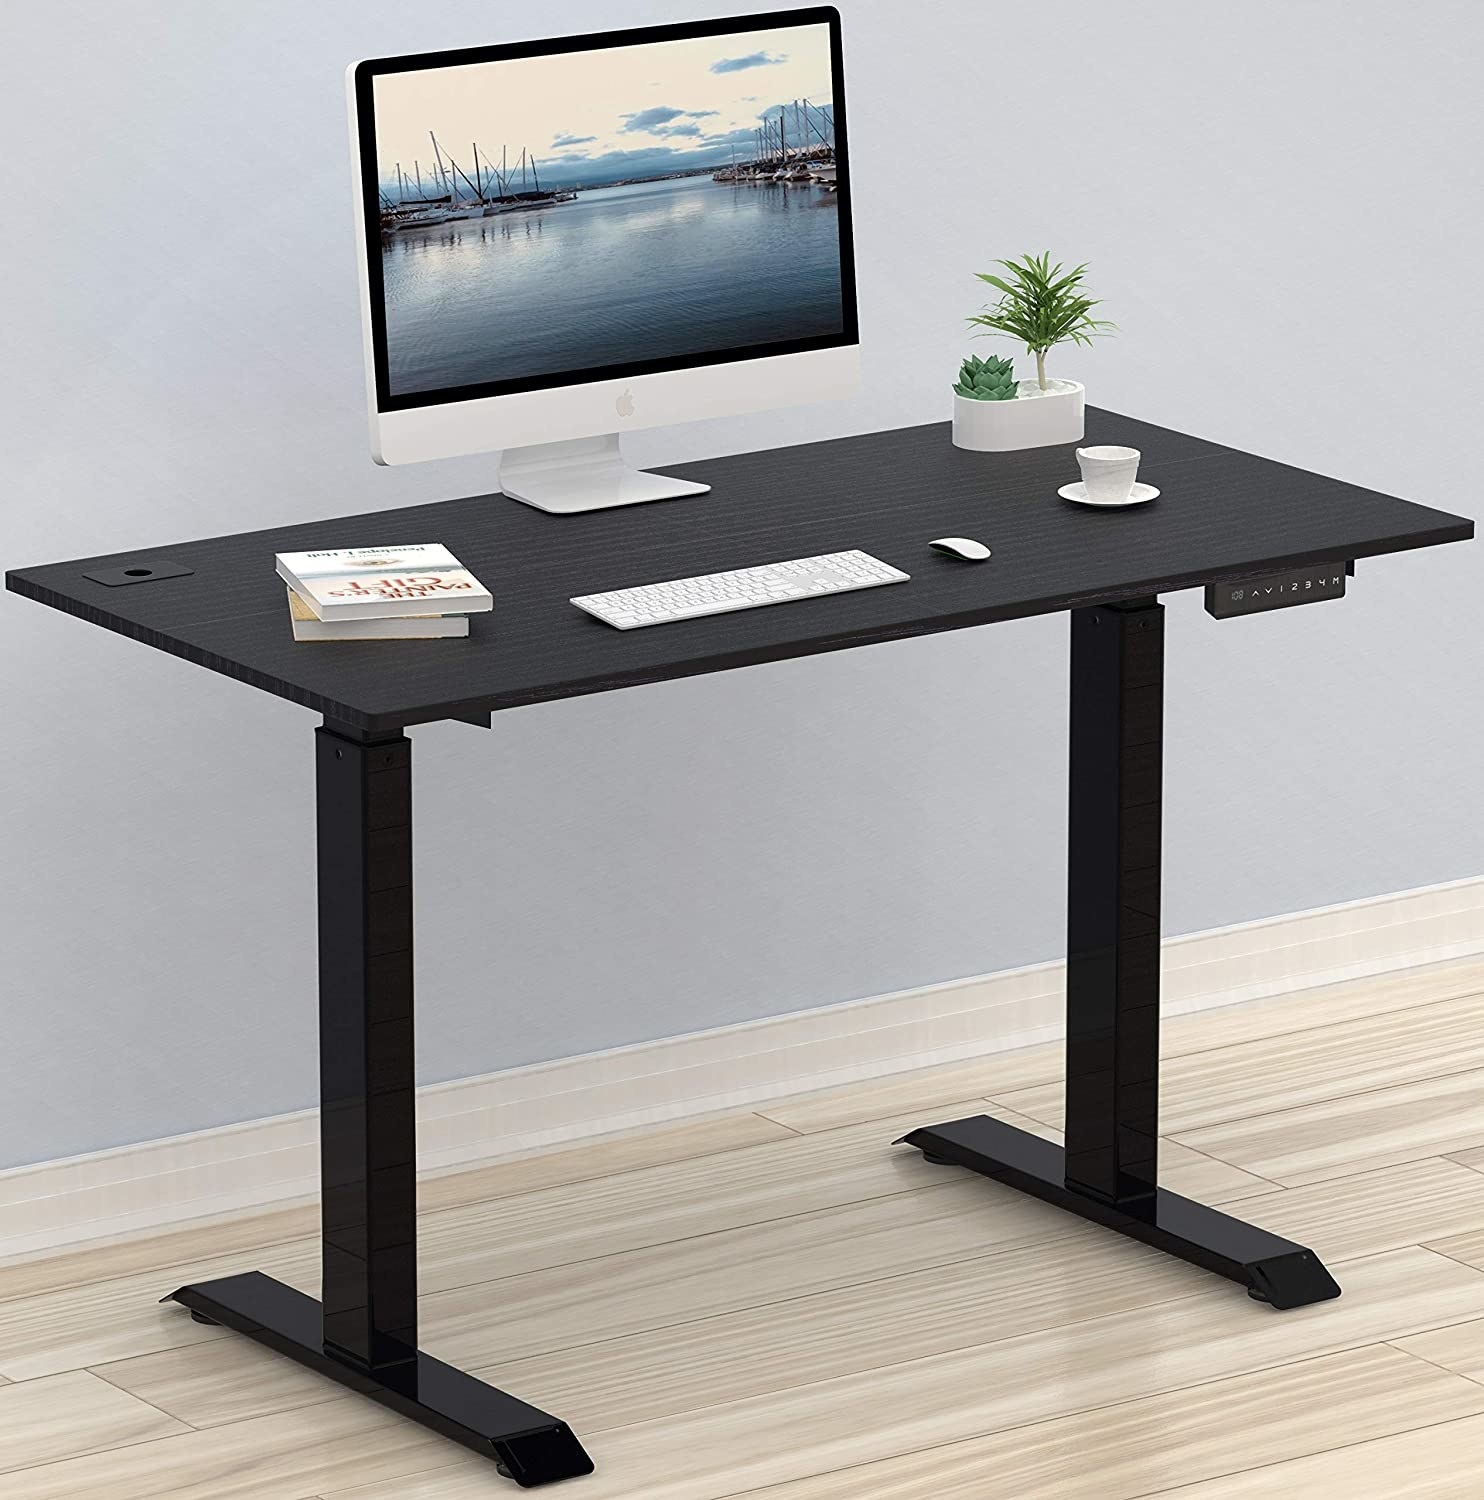 the standing desk with a computer and keyboard on it